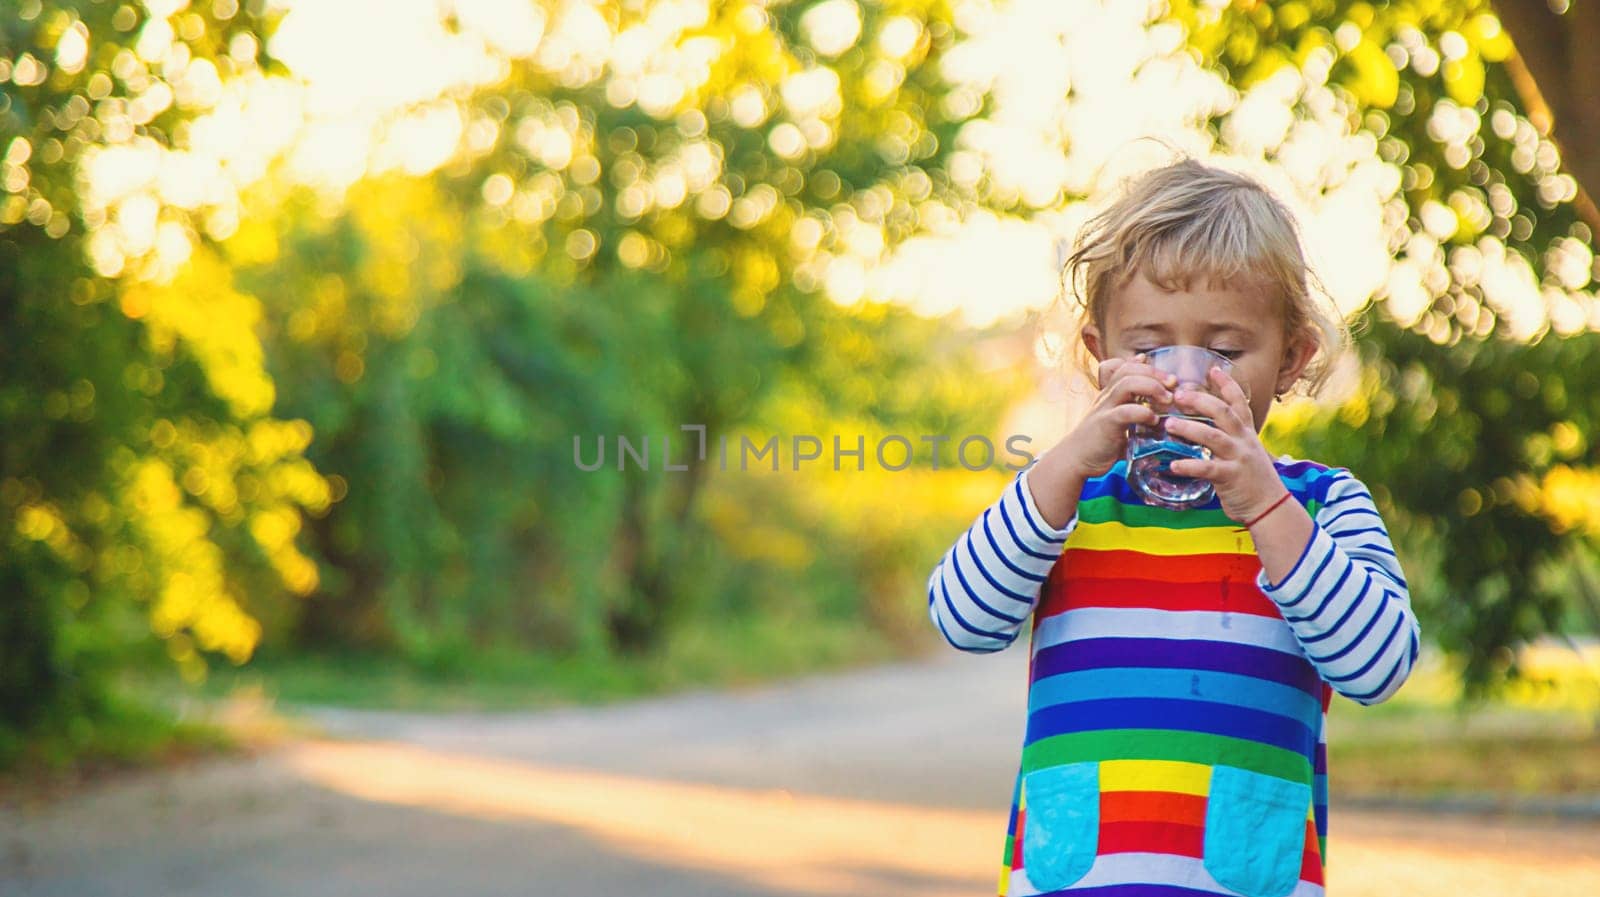 a child drinks water from a glass. Selective focus. by yanadjana